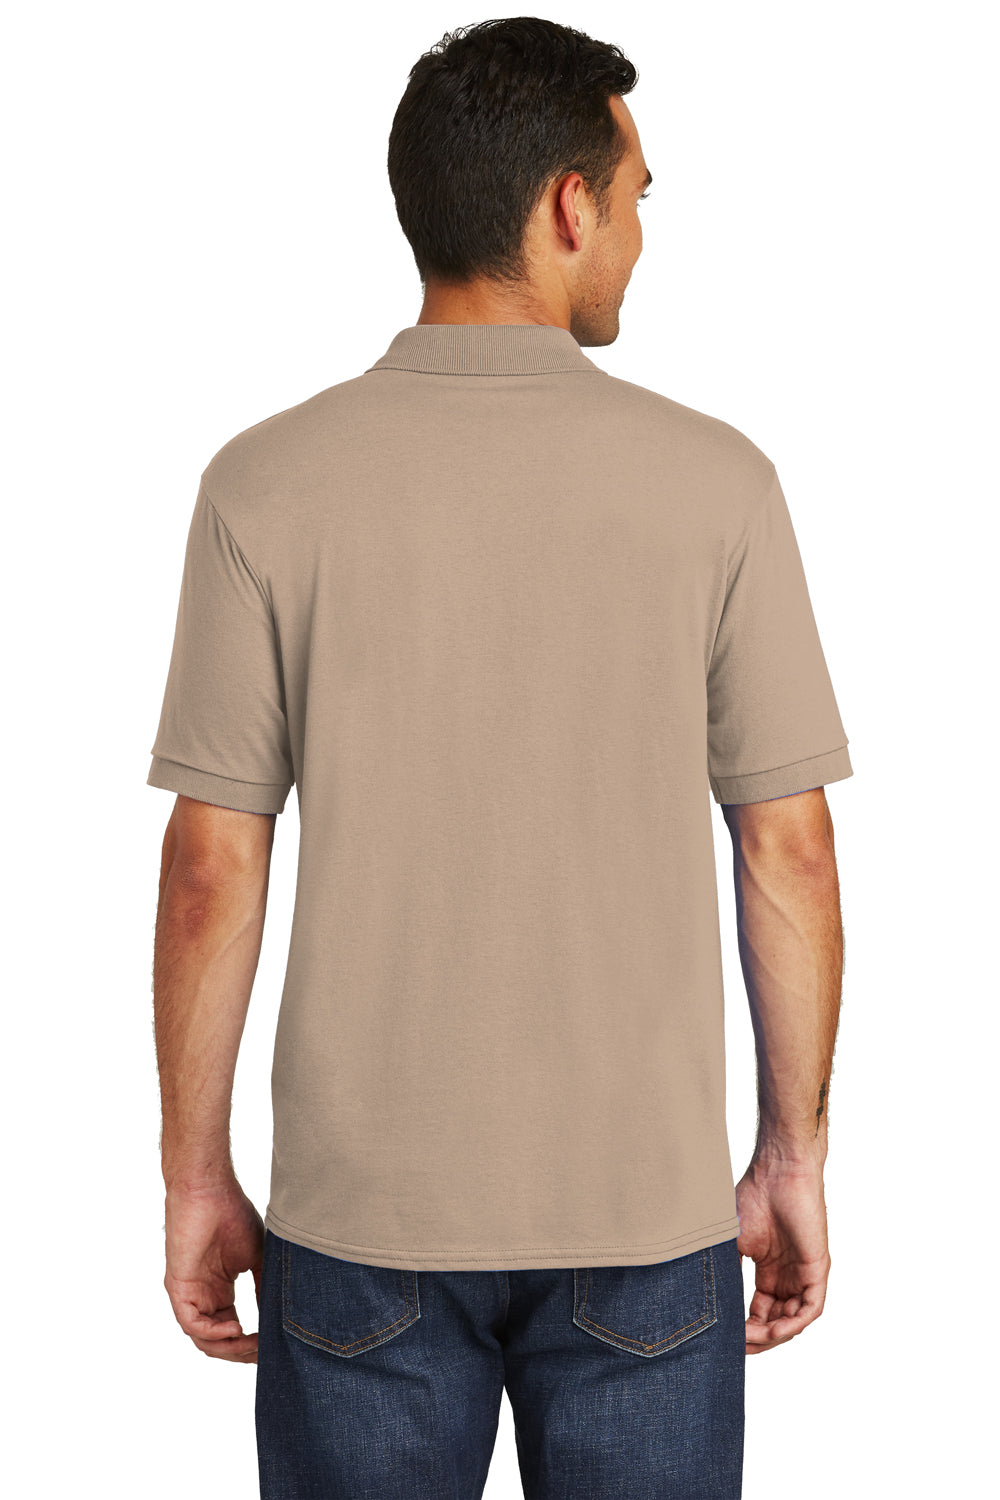 Port & Company KP55 Mens Core Stain Resistant Short Sleeve Polo Shirt Sand Brown Back